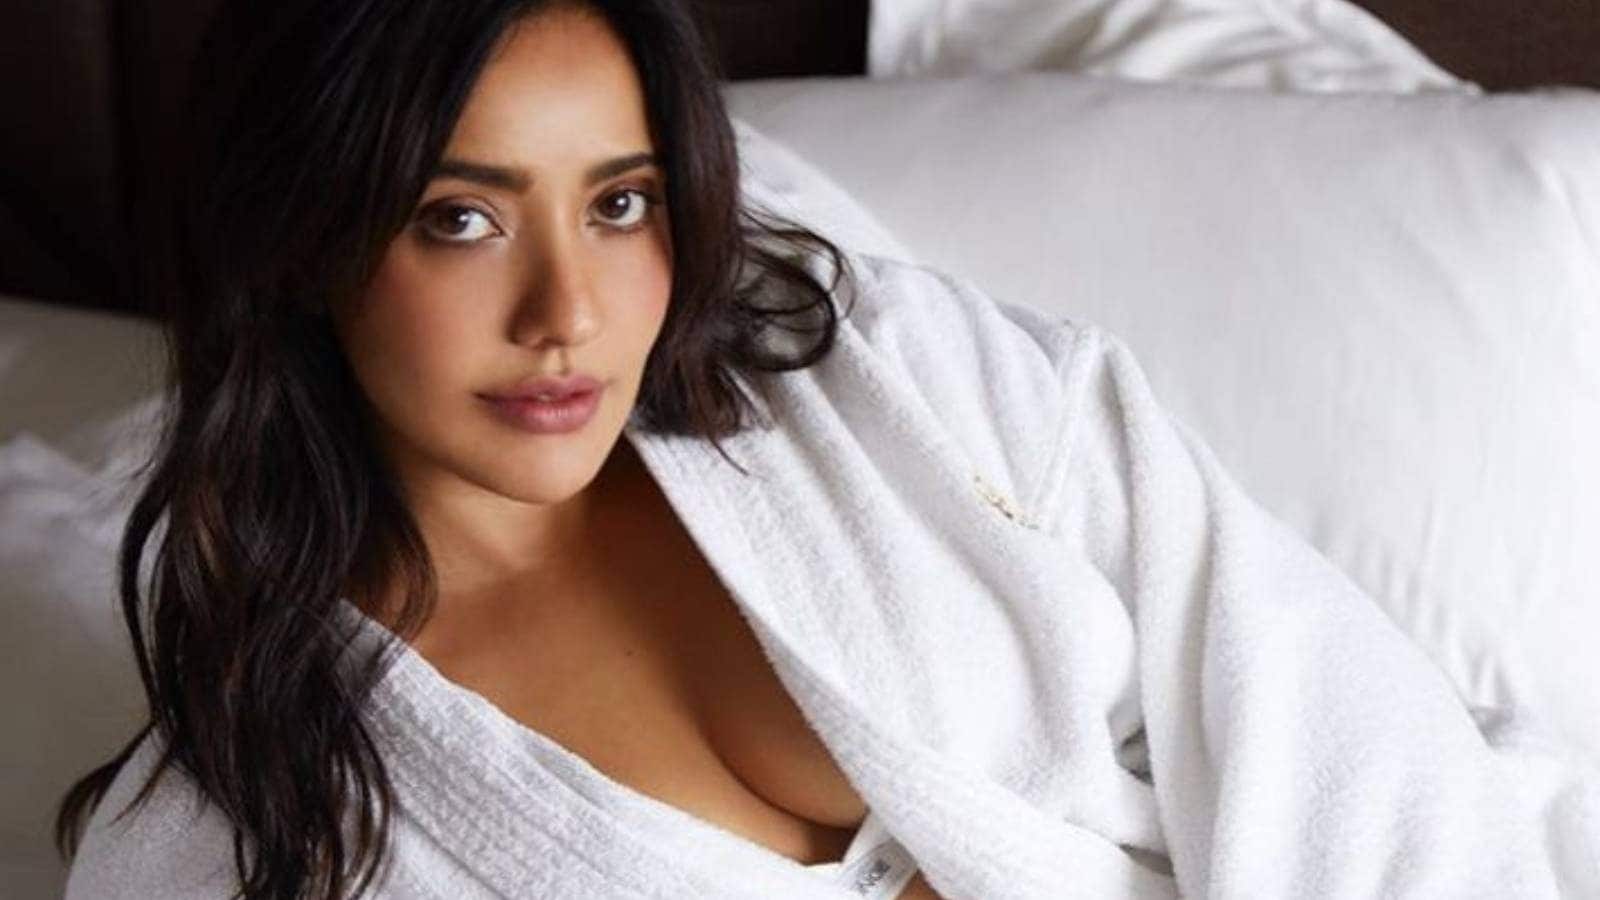 Neha Sharma Teases Fans With Sexy Photos In White Lingerie And Bathrobe, Check Out The Divas Sultry Pictures